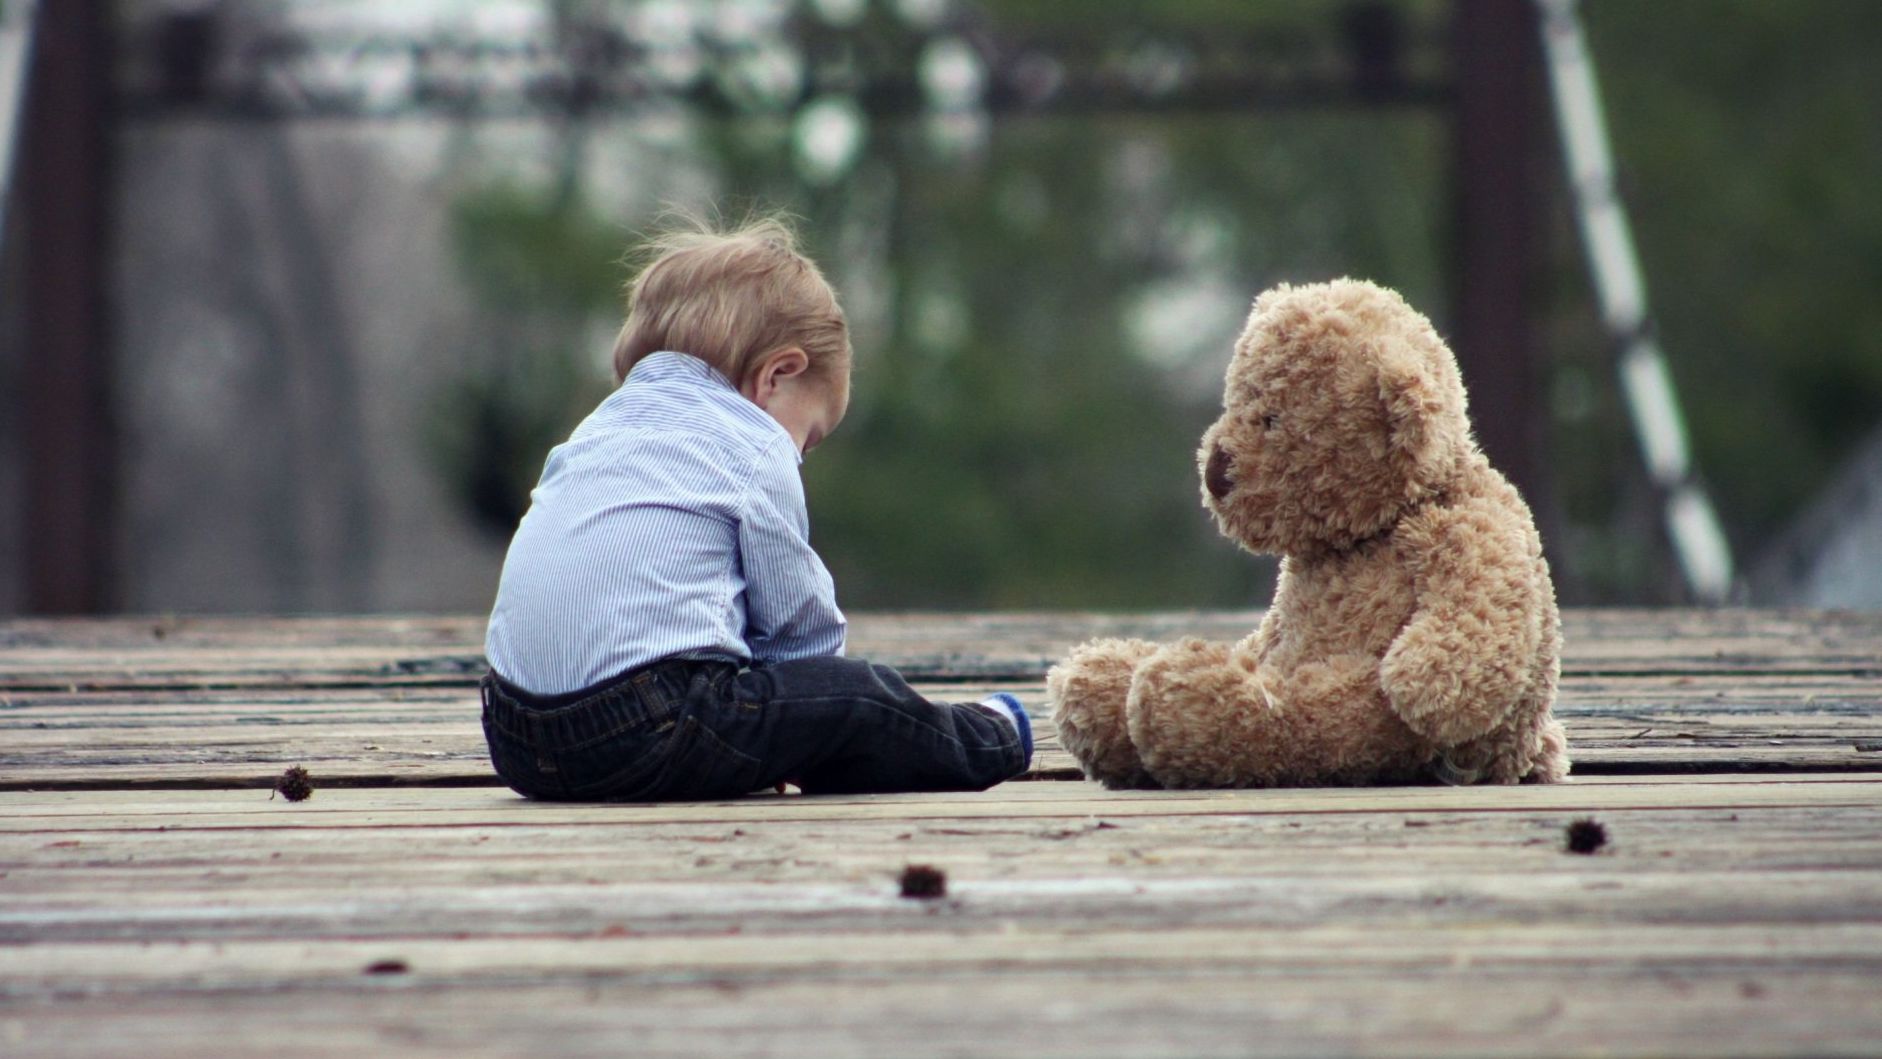 a little boy is sitting next to a teddy bear on a wooden deck .